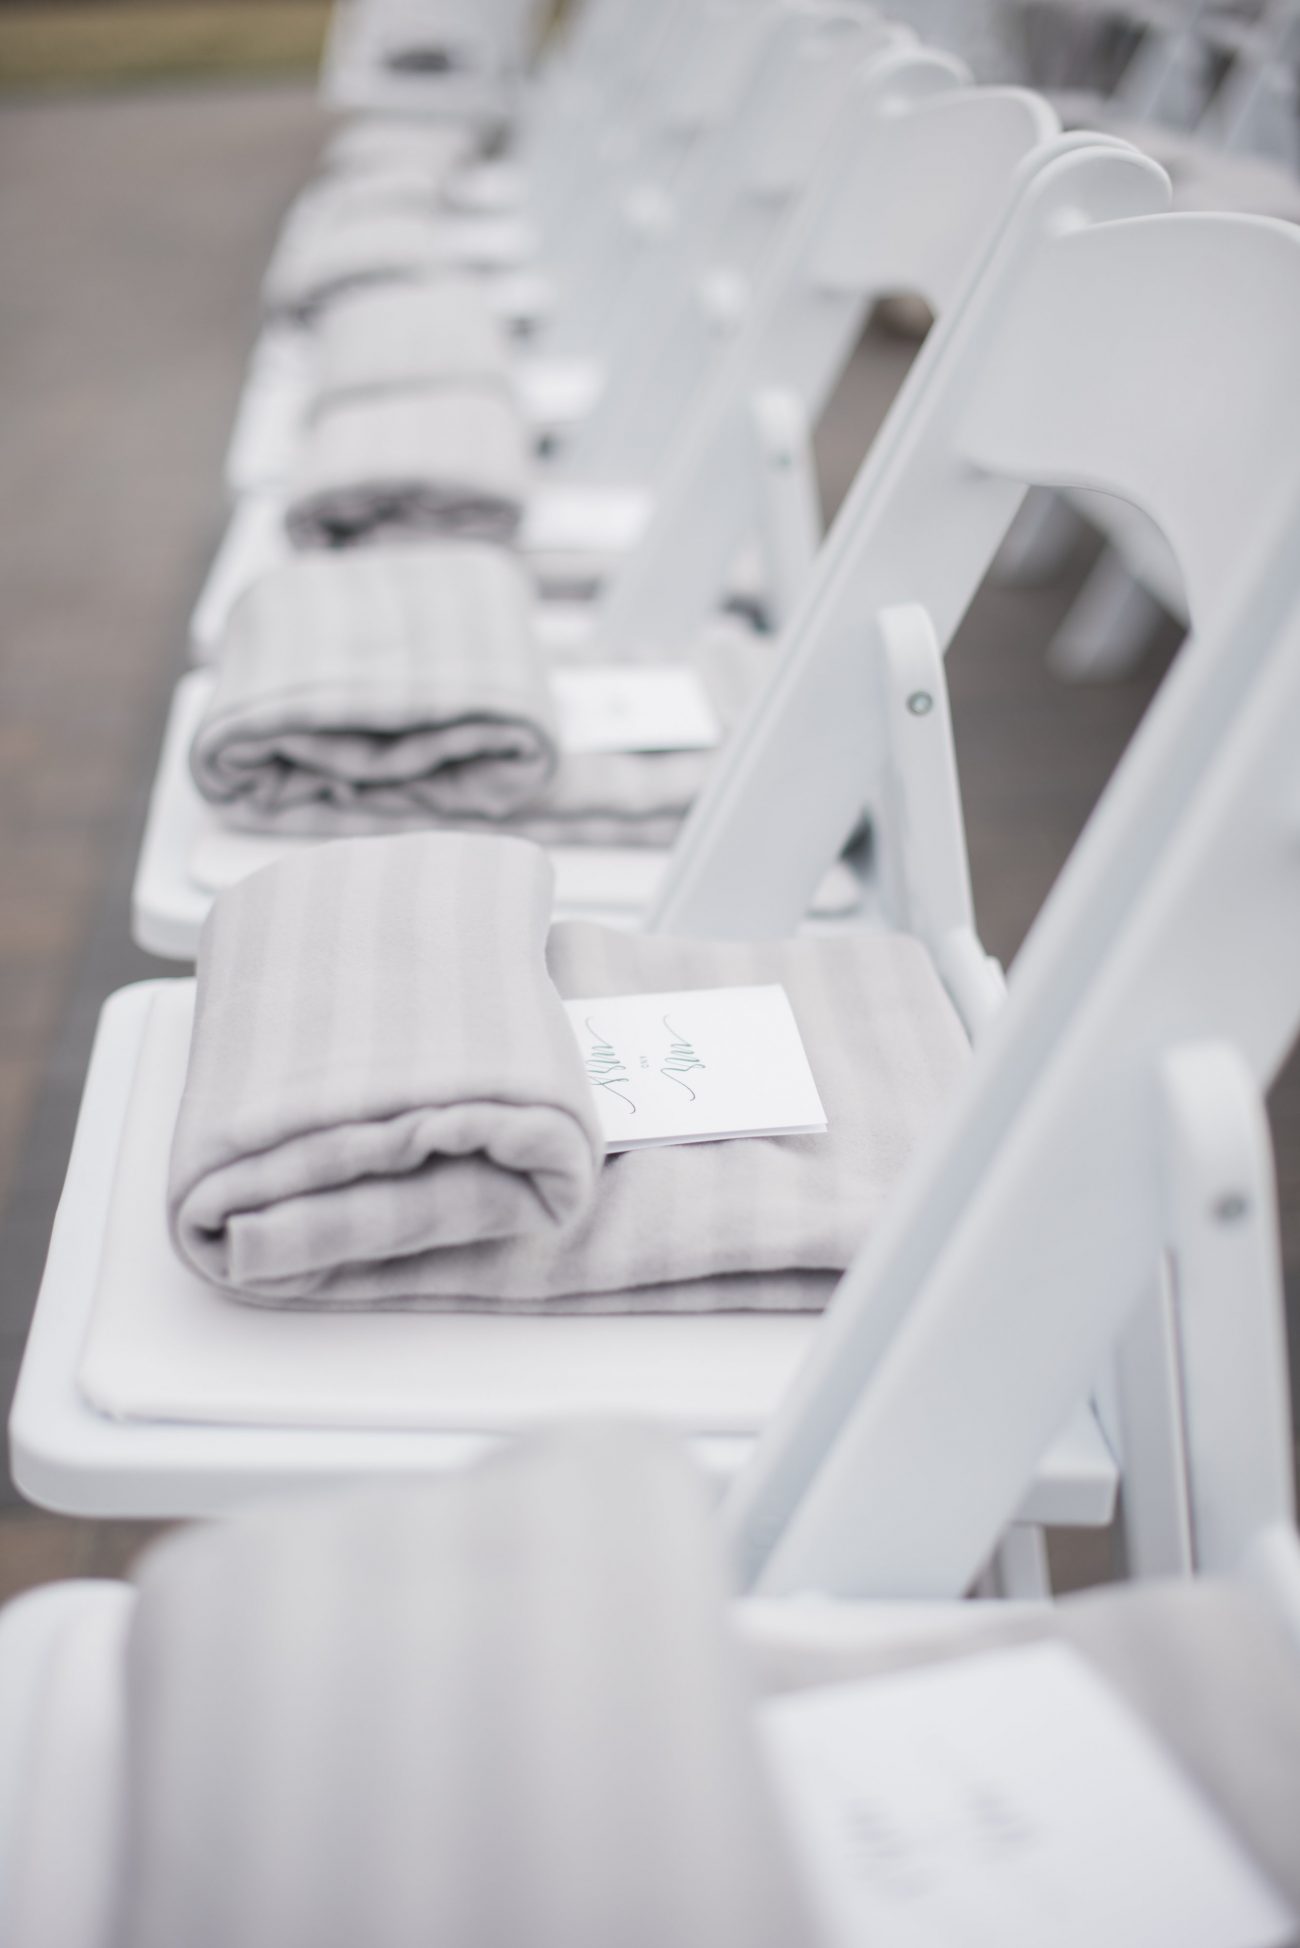 shawls provided on chairs for outdoor wedding event